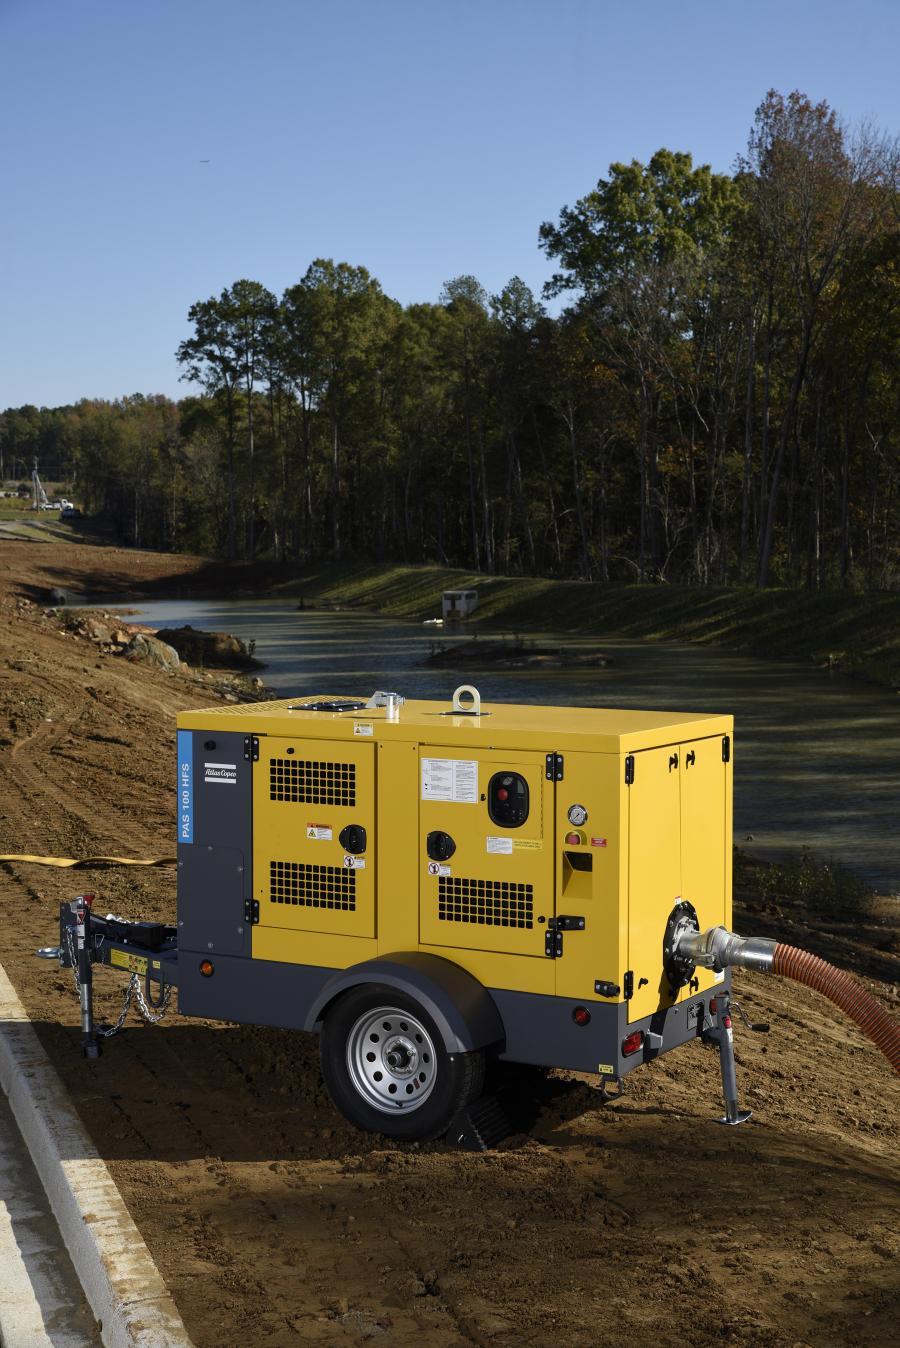 Atlas Copco Power Technique, a provider of air, flow and power solutions, has announced Allied Technical Services Inc. as a dealer, effective immediately.